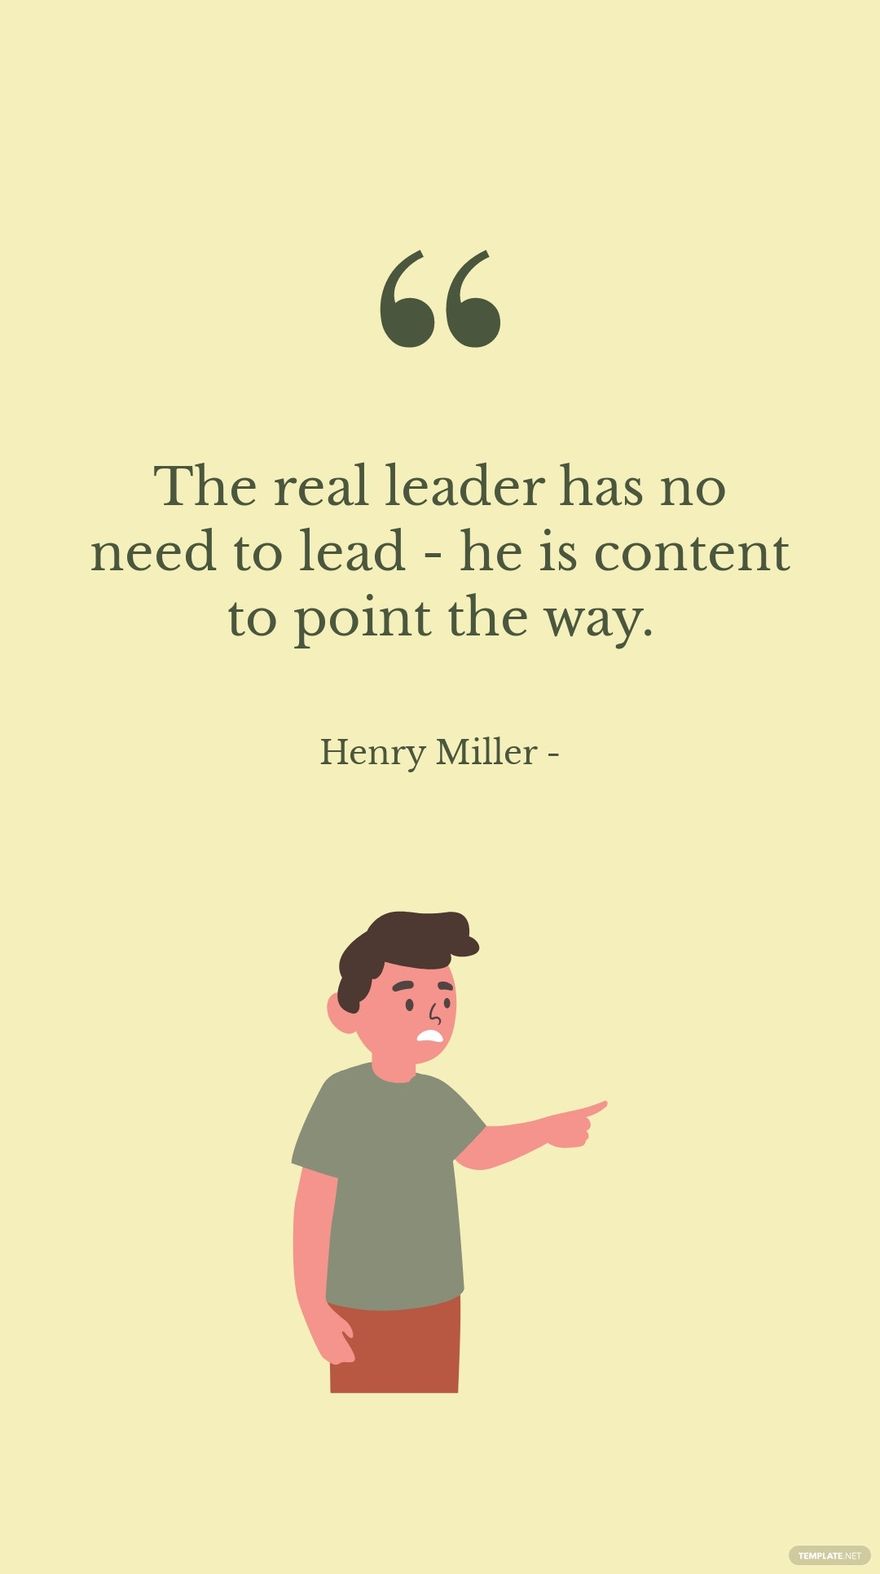 Free Henry Miller - The real leader has no need to lead - he is content to point the way. in JPG